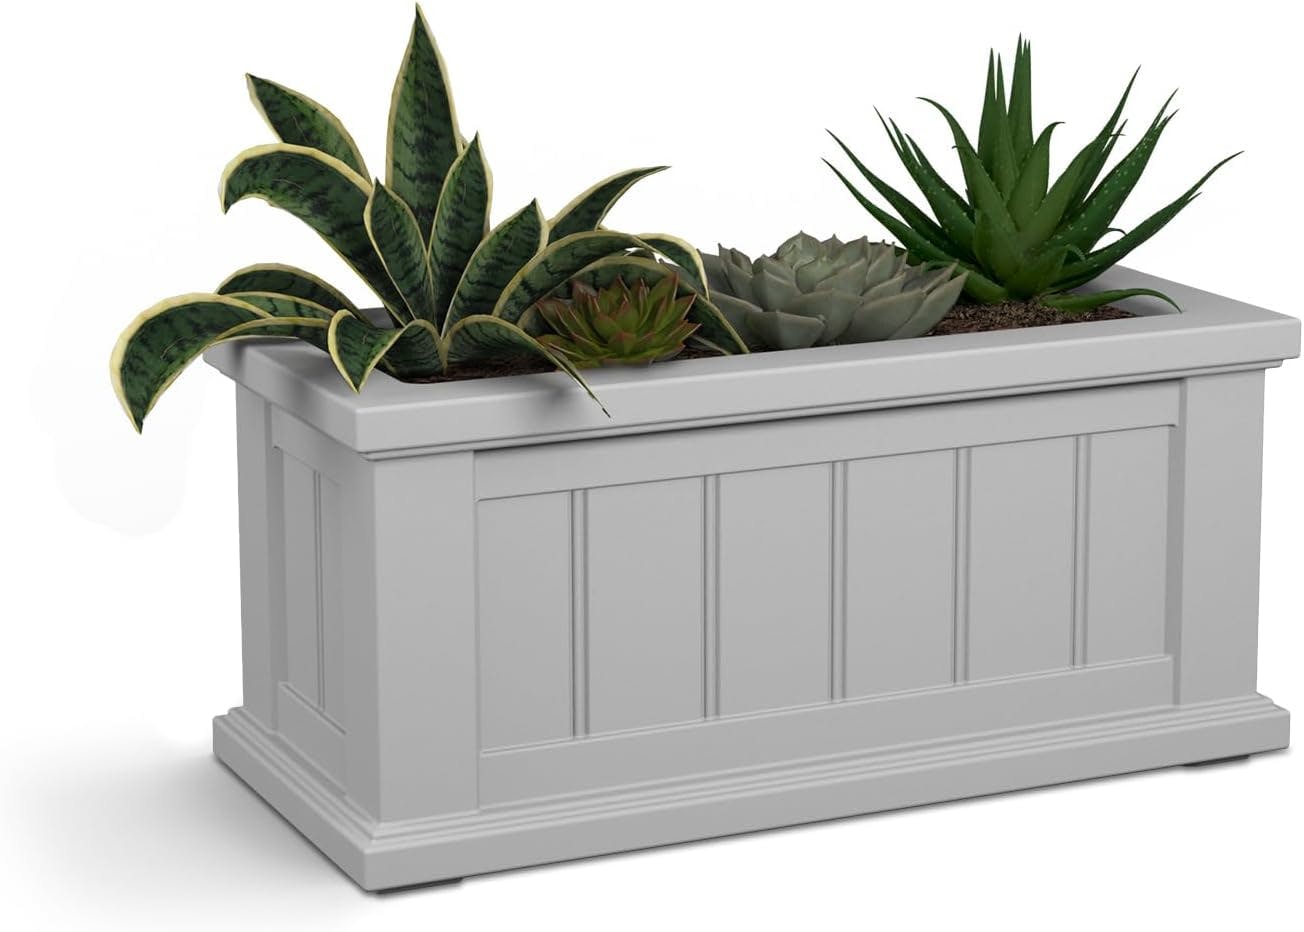 Cape Cod 24" White Rectangle Self-Watering Polyethylene Outdoor Planter